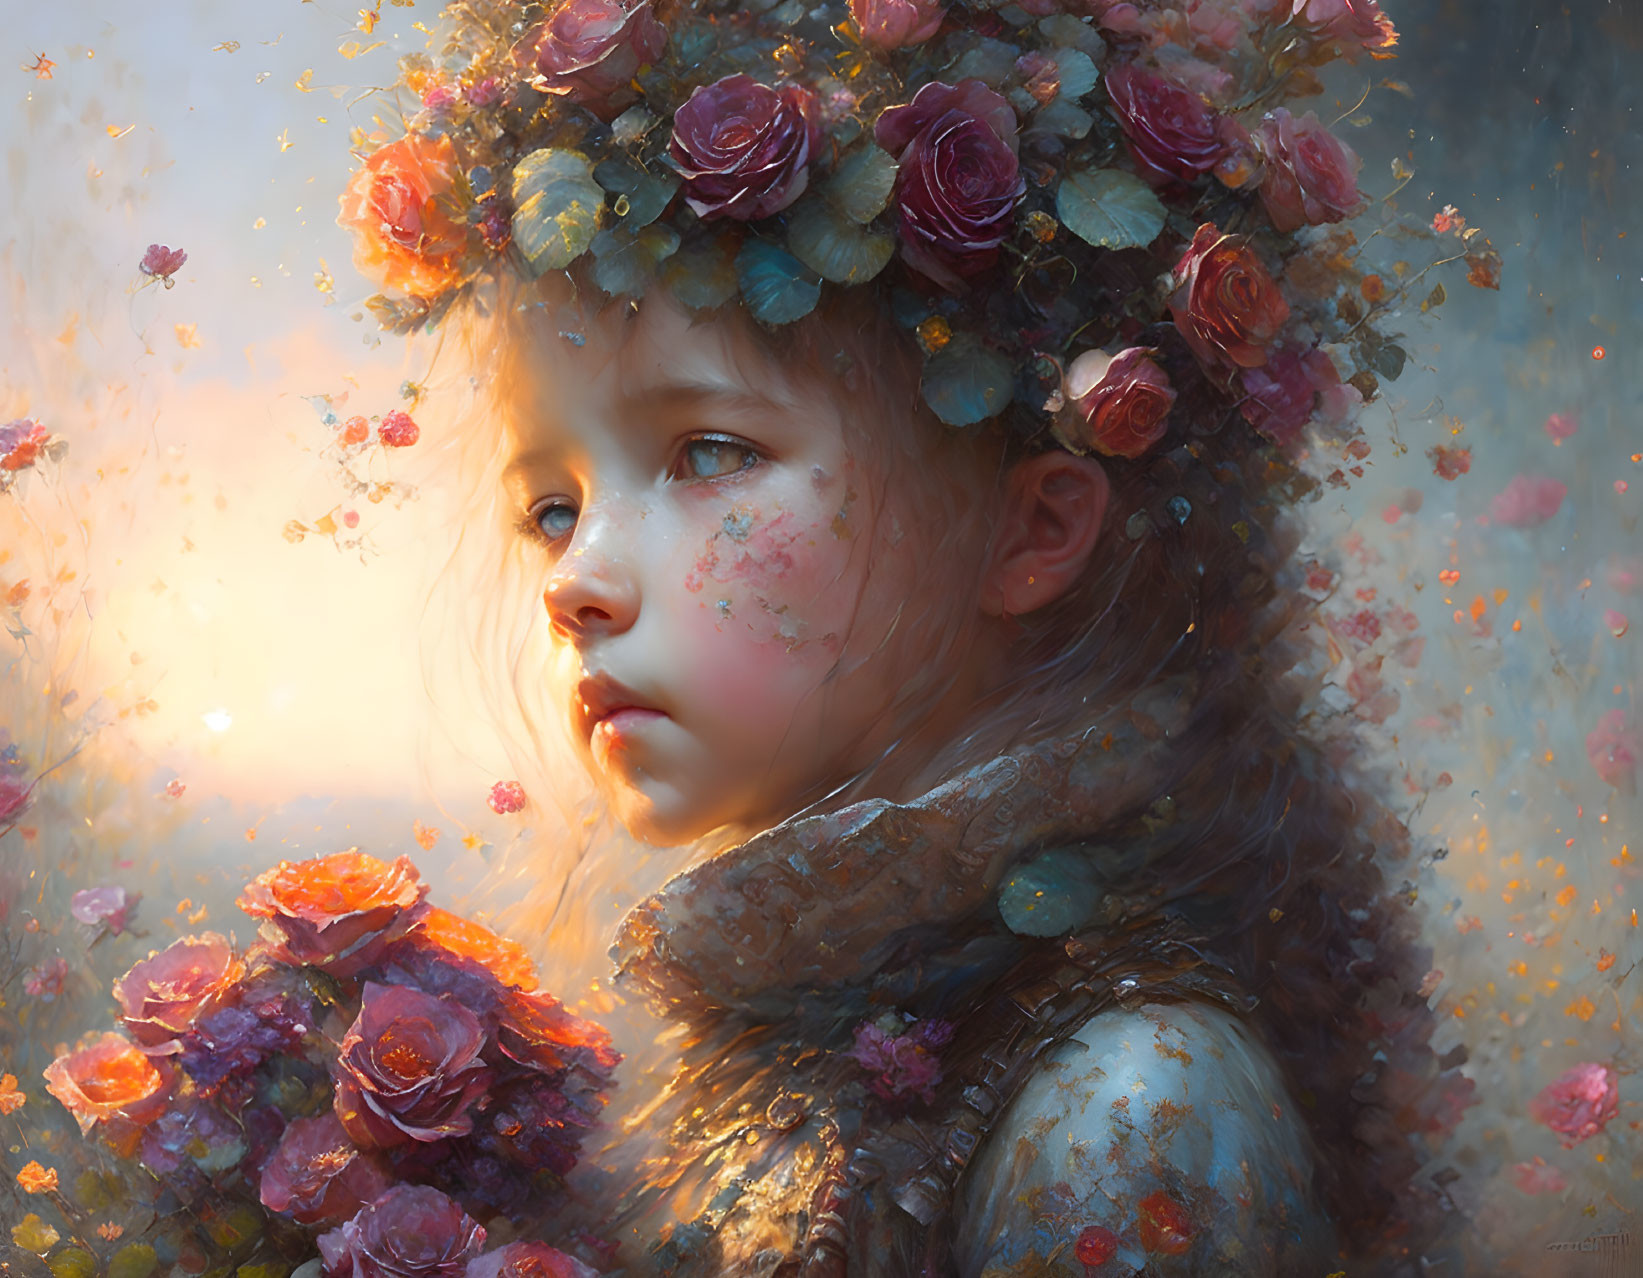 Young girl with floral crown surrounded by floating rose petals